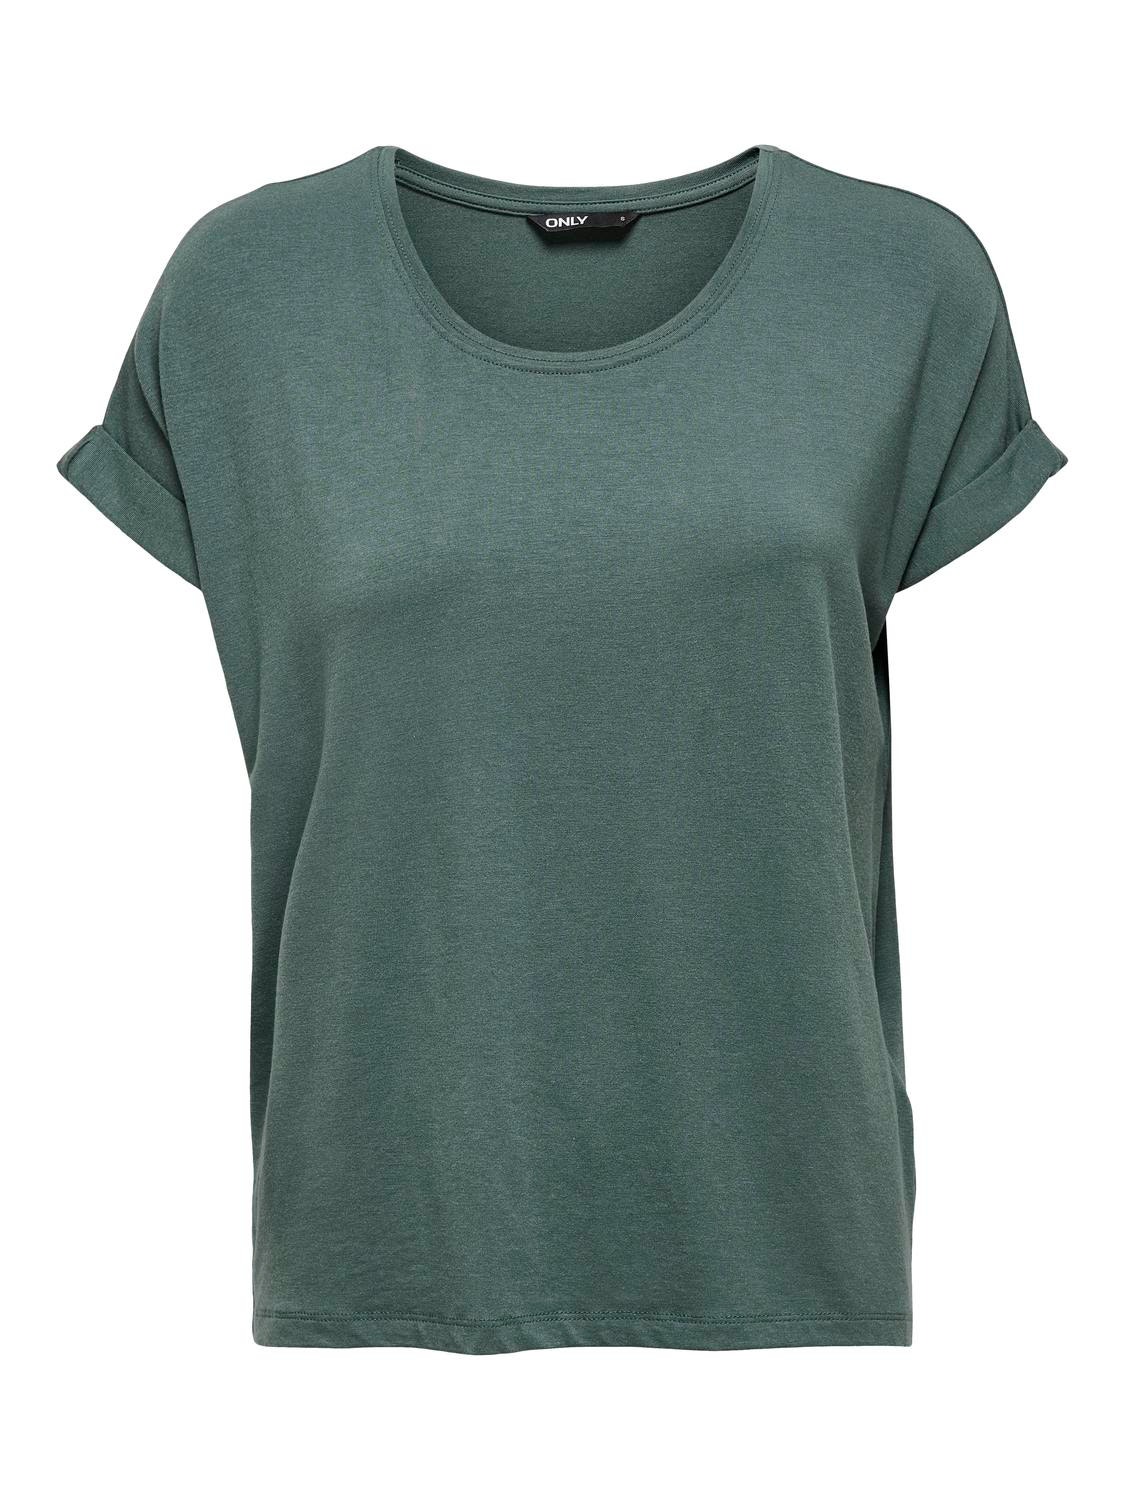 ONLY Ample T-Shirt -Balsam Green - 15106662